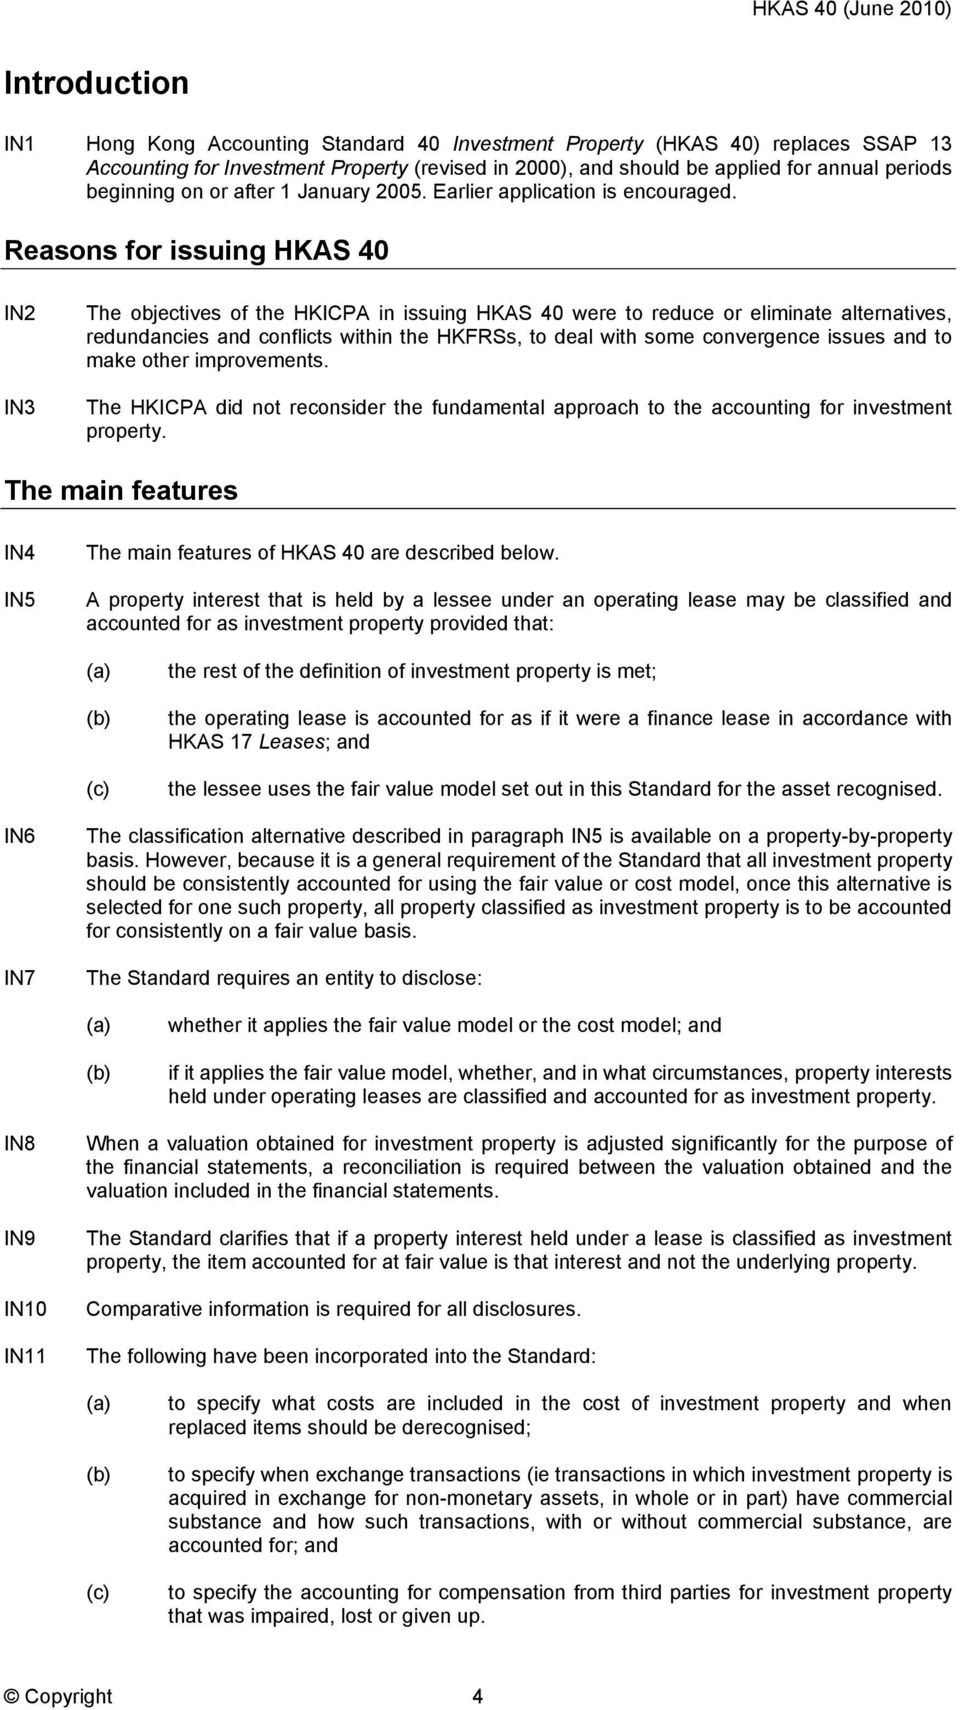 Reasons for issuing HKAS 40 IN2 IN3 The objectives of the HKICPA in issuing HKAS 40 were to reduce or eliminate alternatives, redundancies and conflicts within the HKFRSs, to deal with some